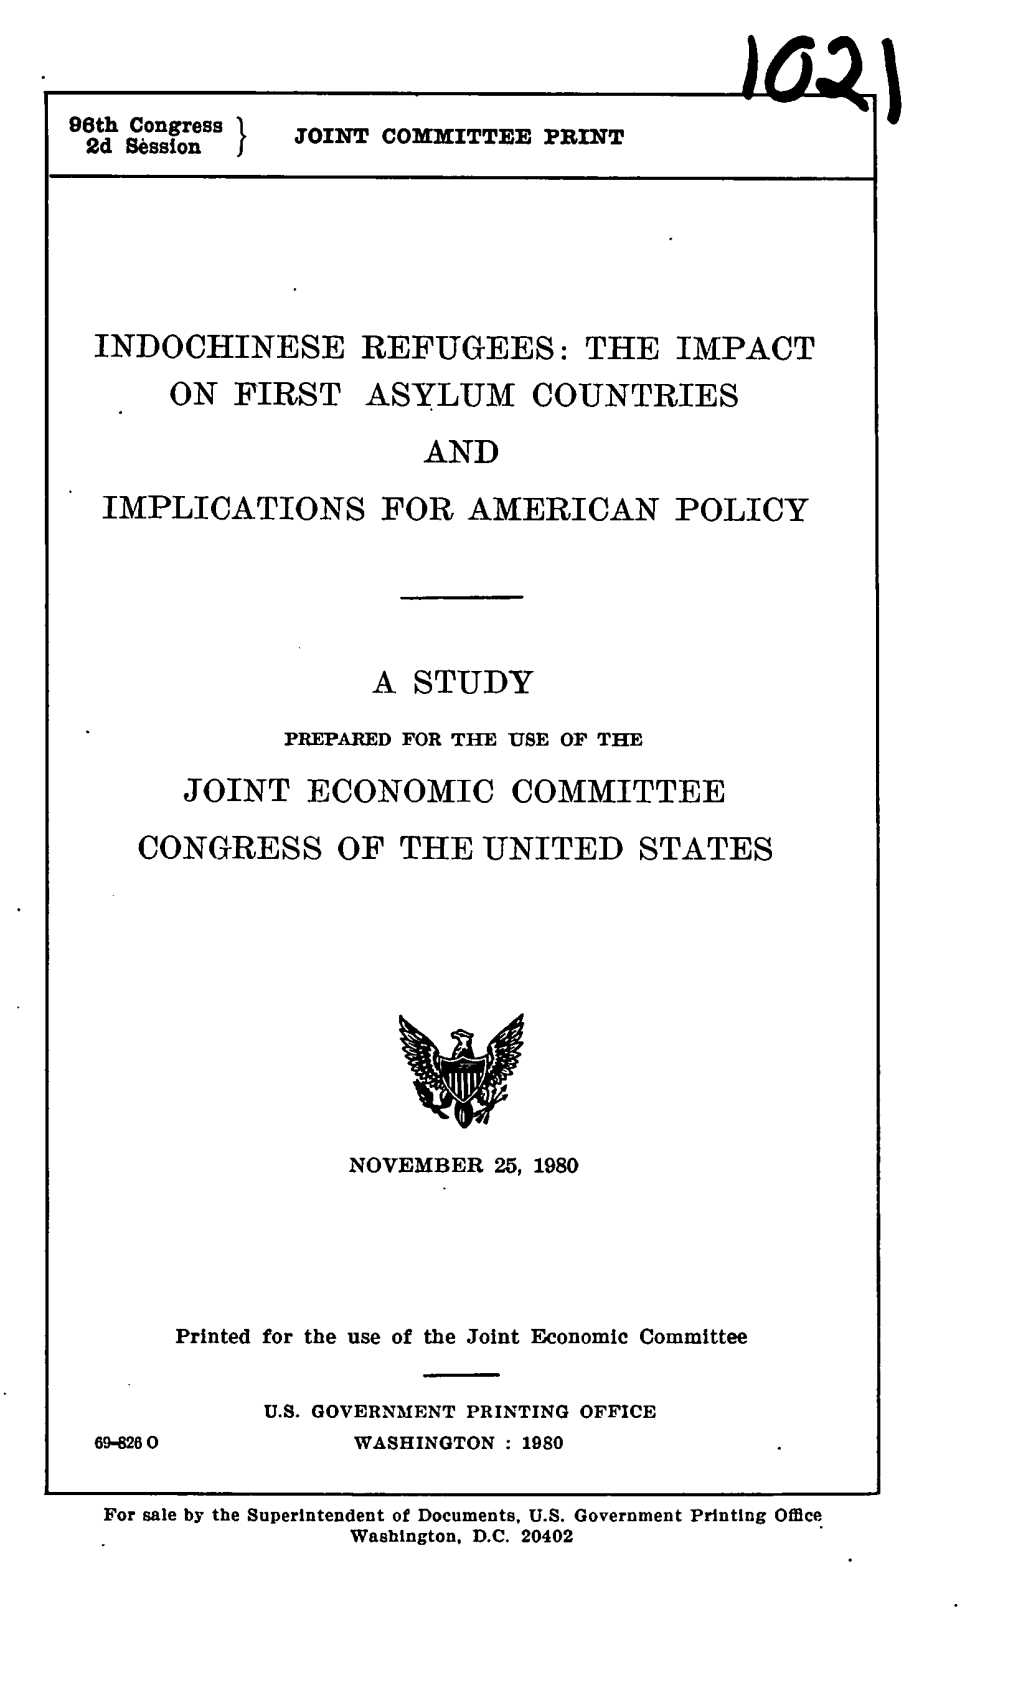 Indochinese Refugees: the Impact on First Asylum Countries and Implications for American Policy